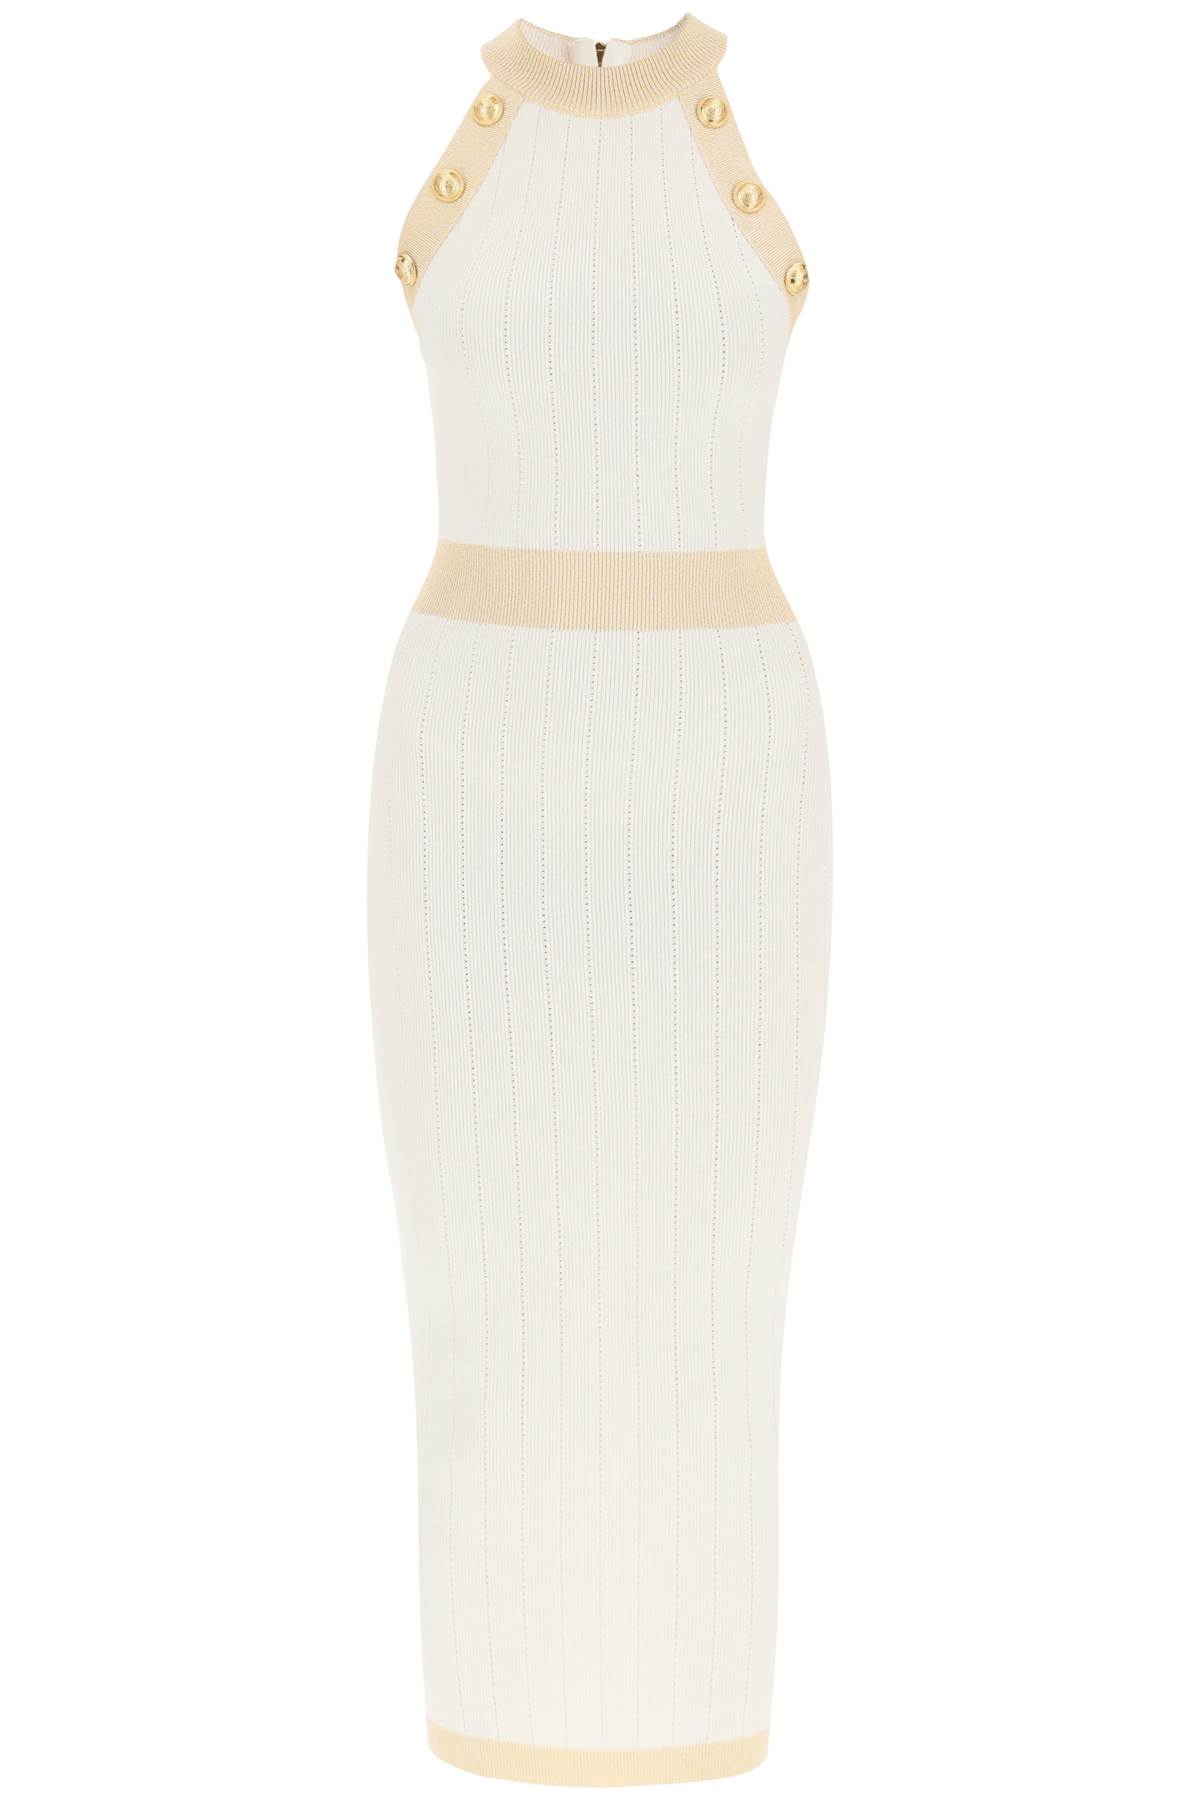 Balmain Knitted Midi Dress With Buttons And Lurex Trims